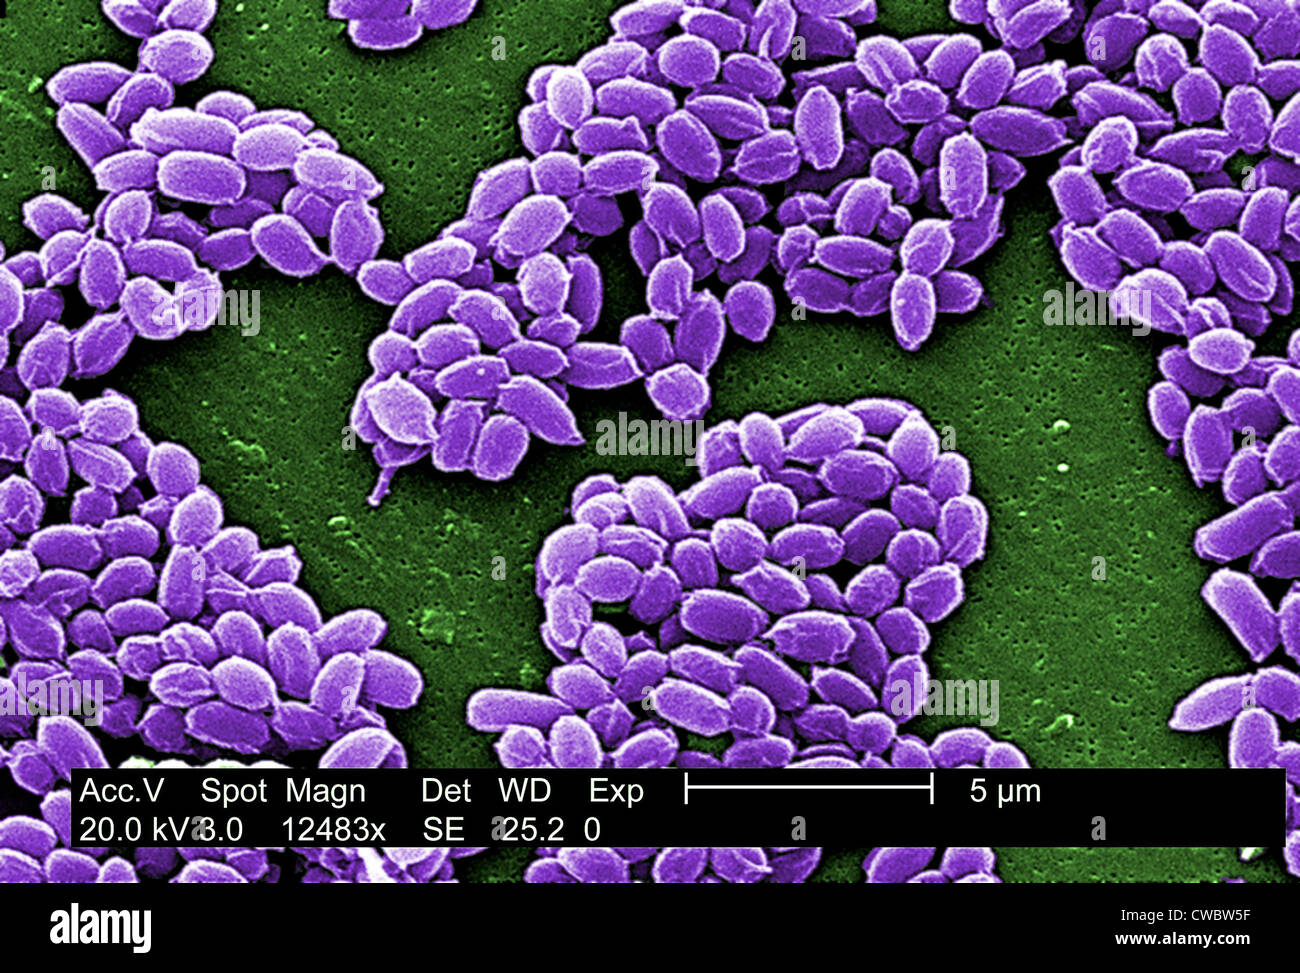 Spores from an anthrax bacteria. These spores live for many years enabling the bacteria to survive in a dormant state. Photo by Stock Photo